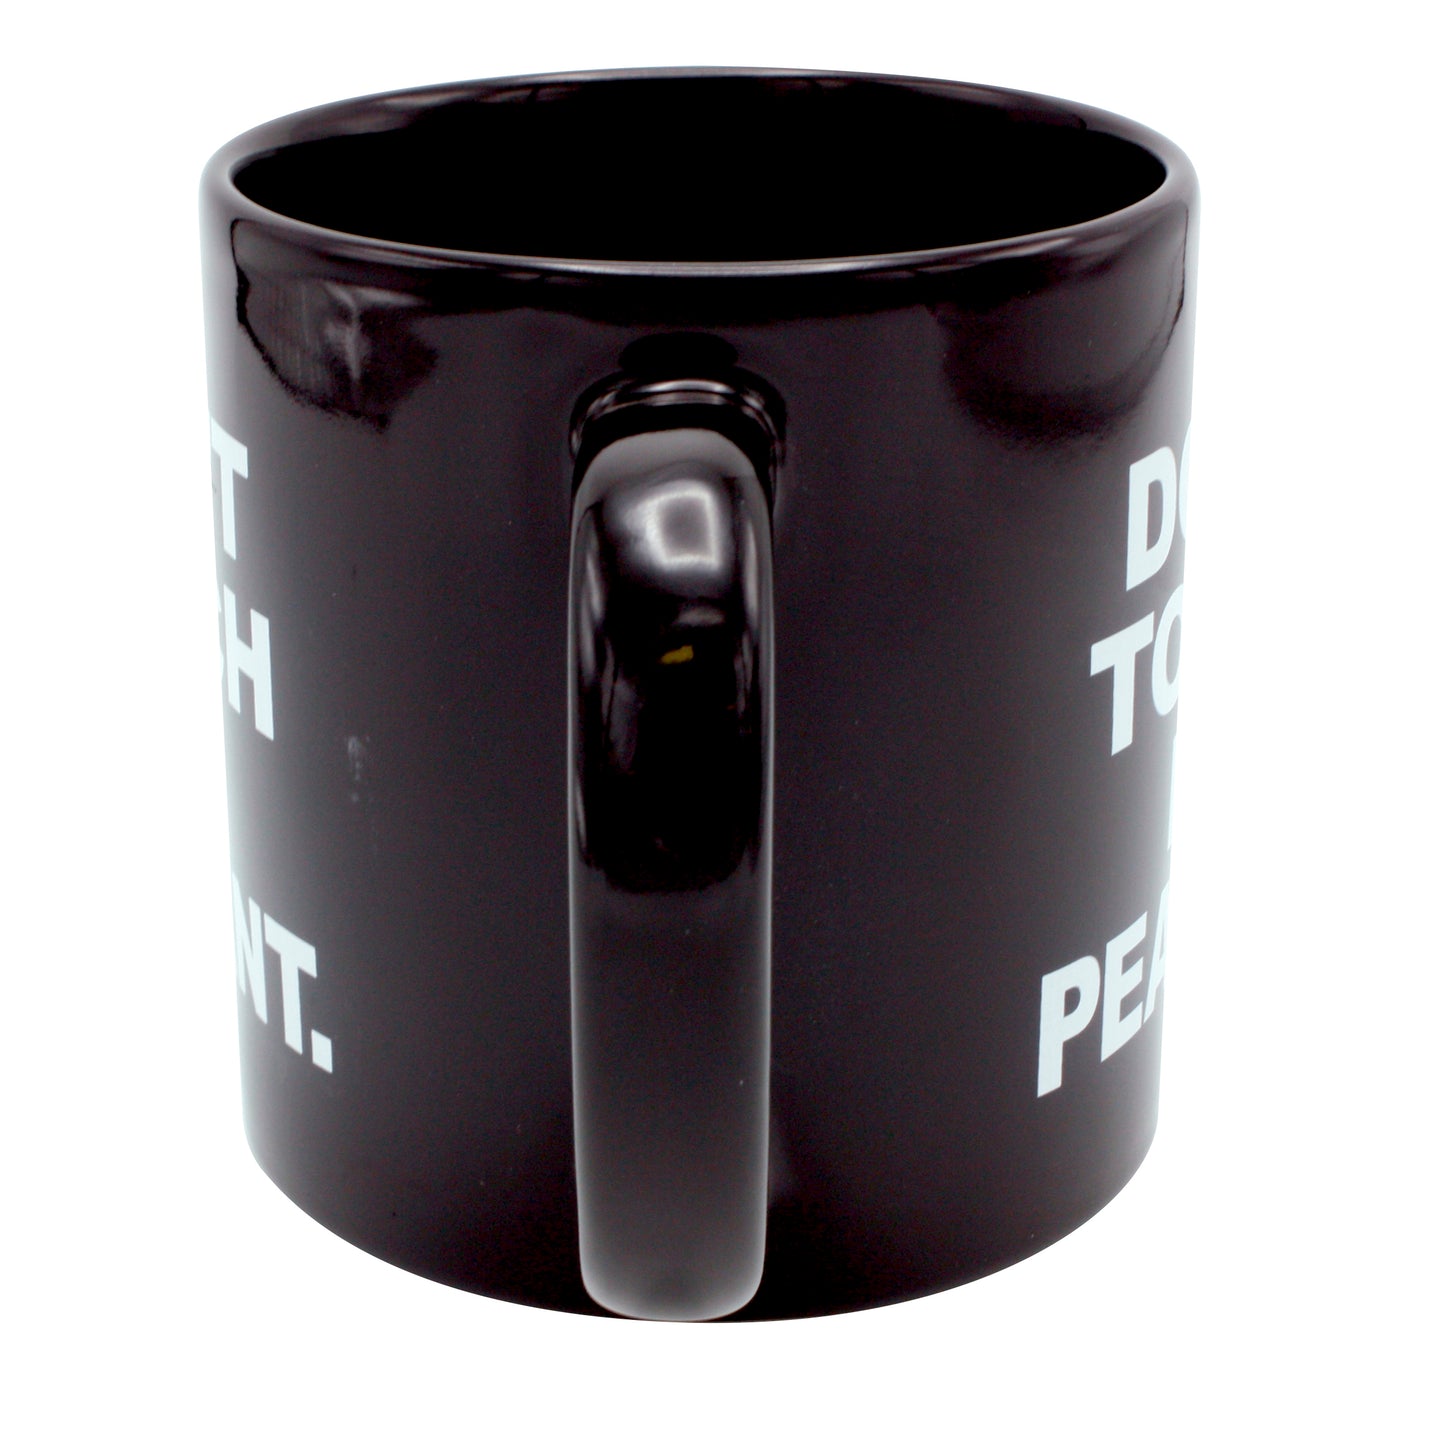 Giant Don't Touch Me Peasant Mug